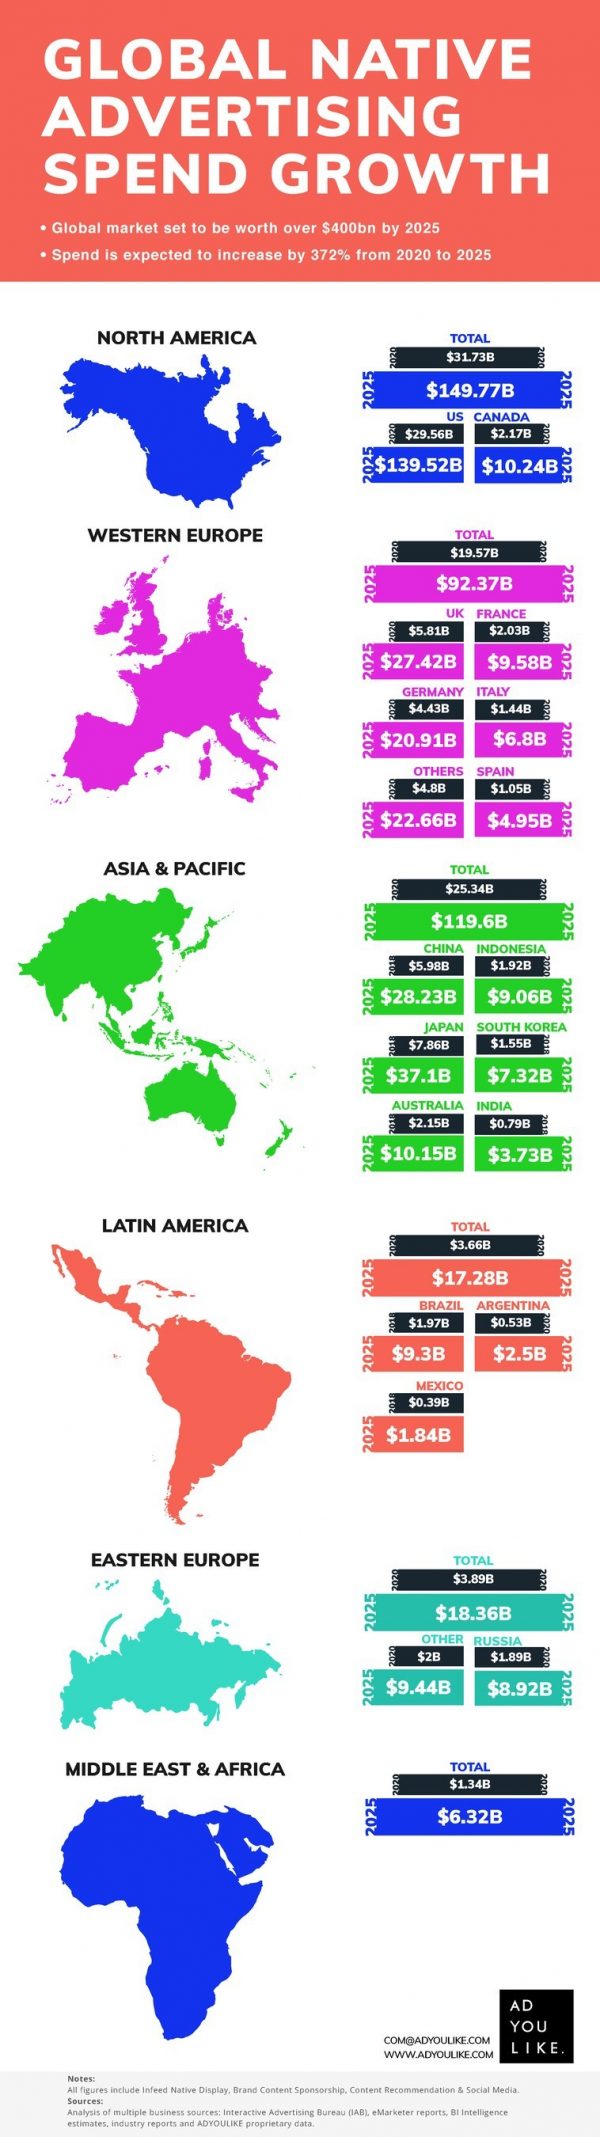 global native advertising spend growth